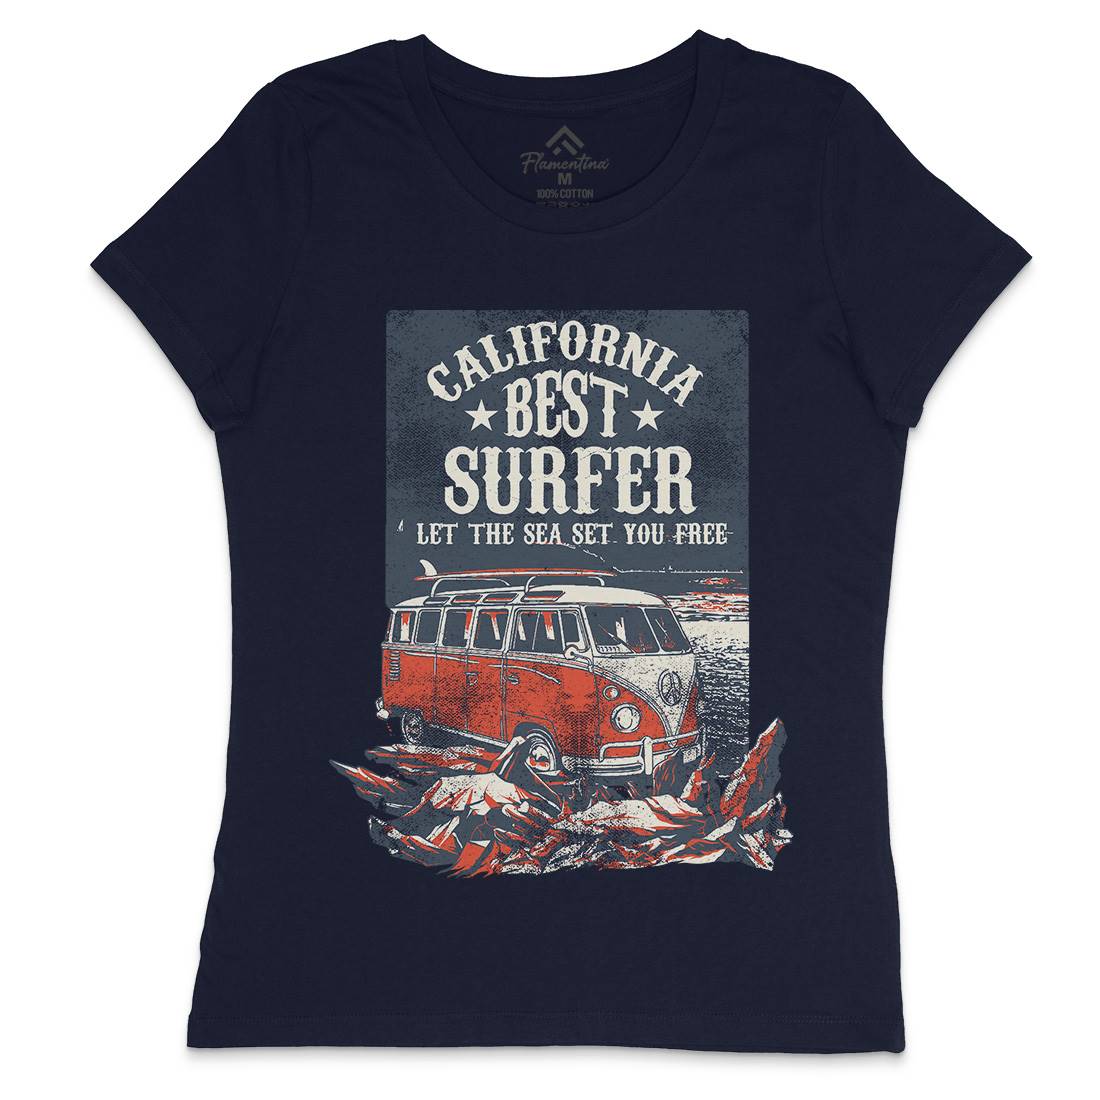 Let The Sea Set You Free Womens Crew Neck T-Shirt Surf C956